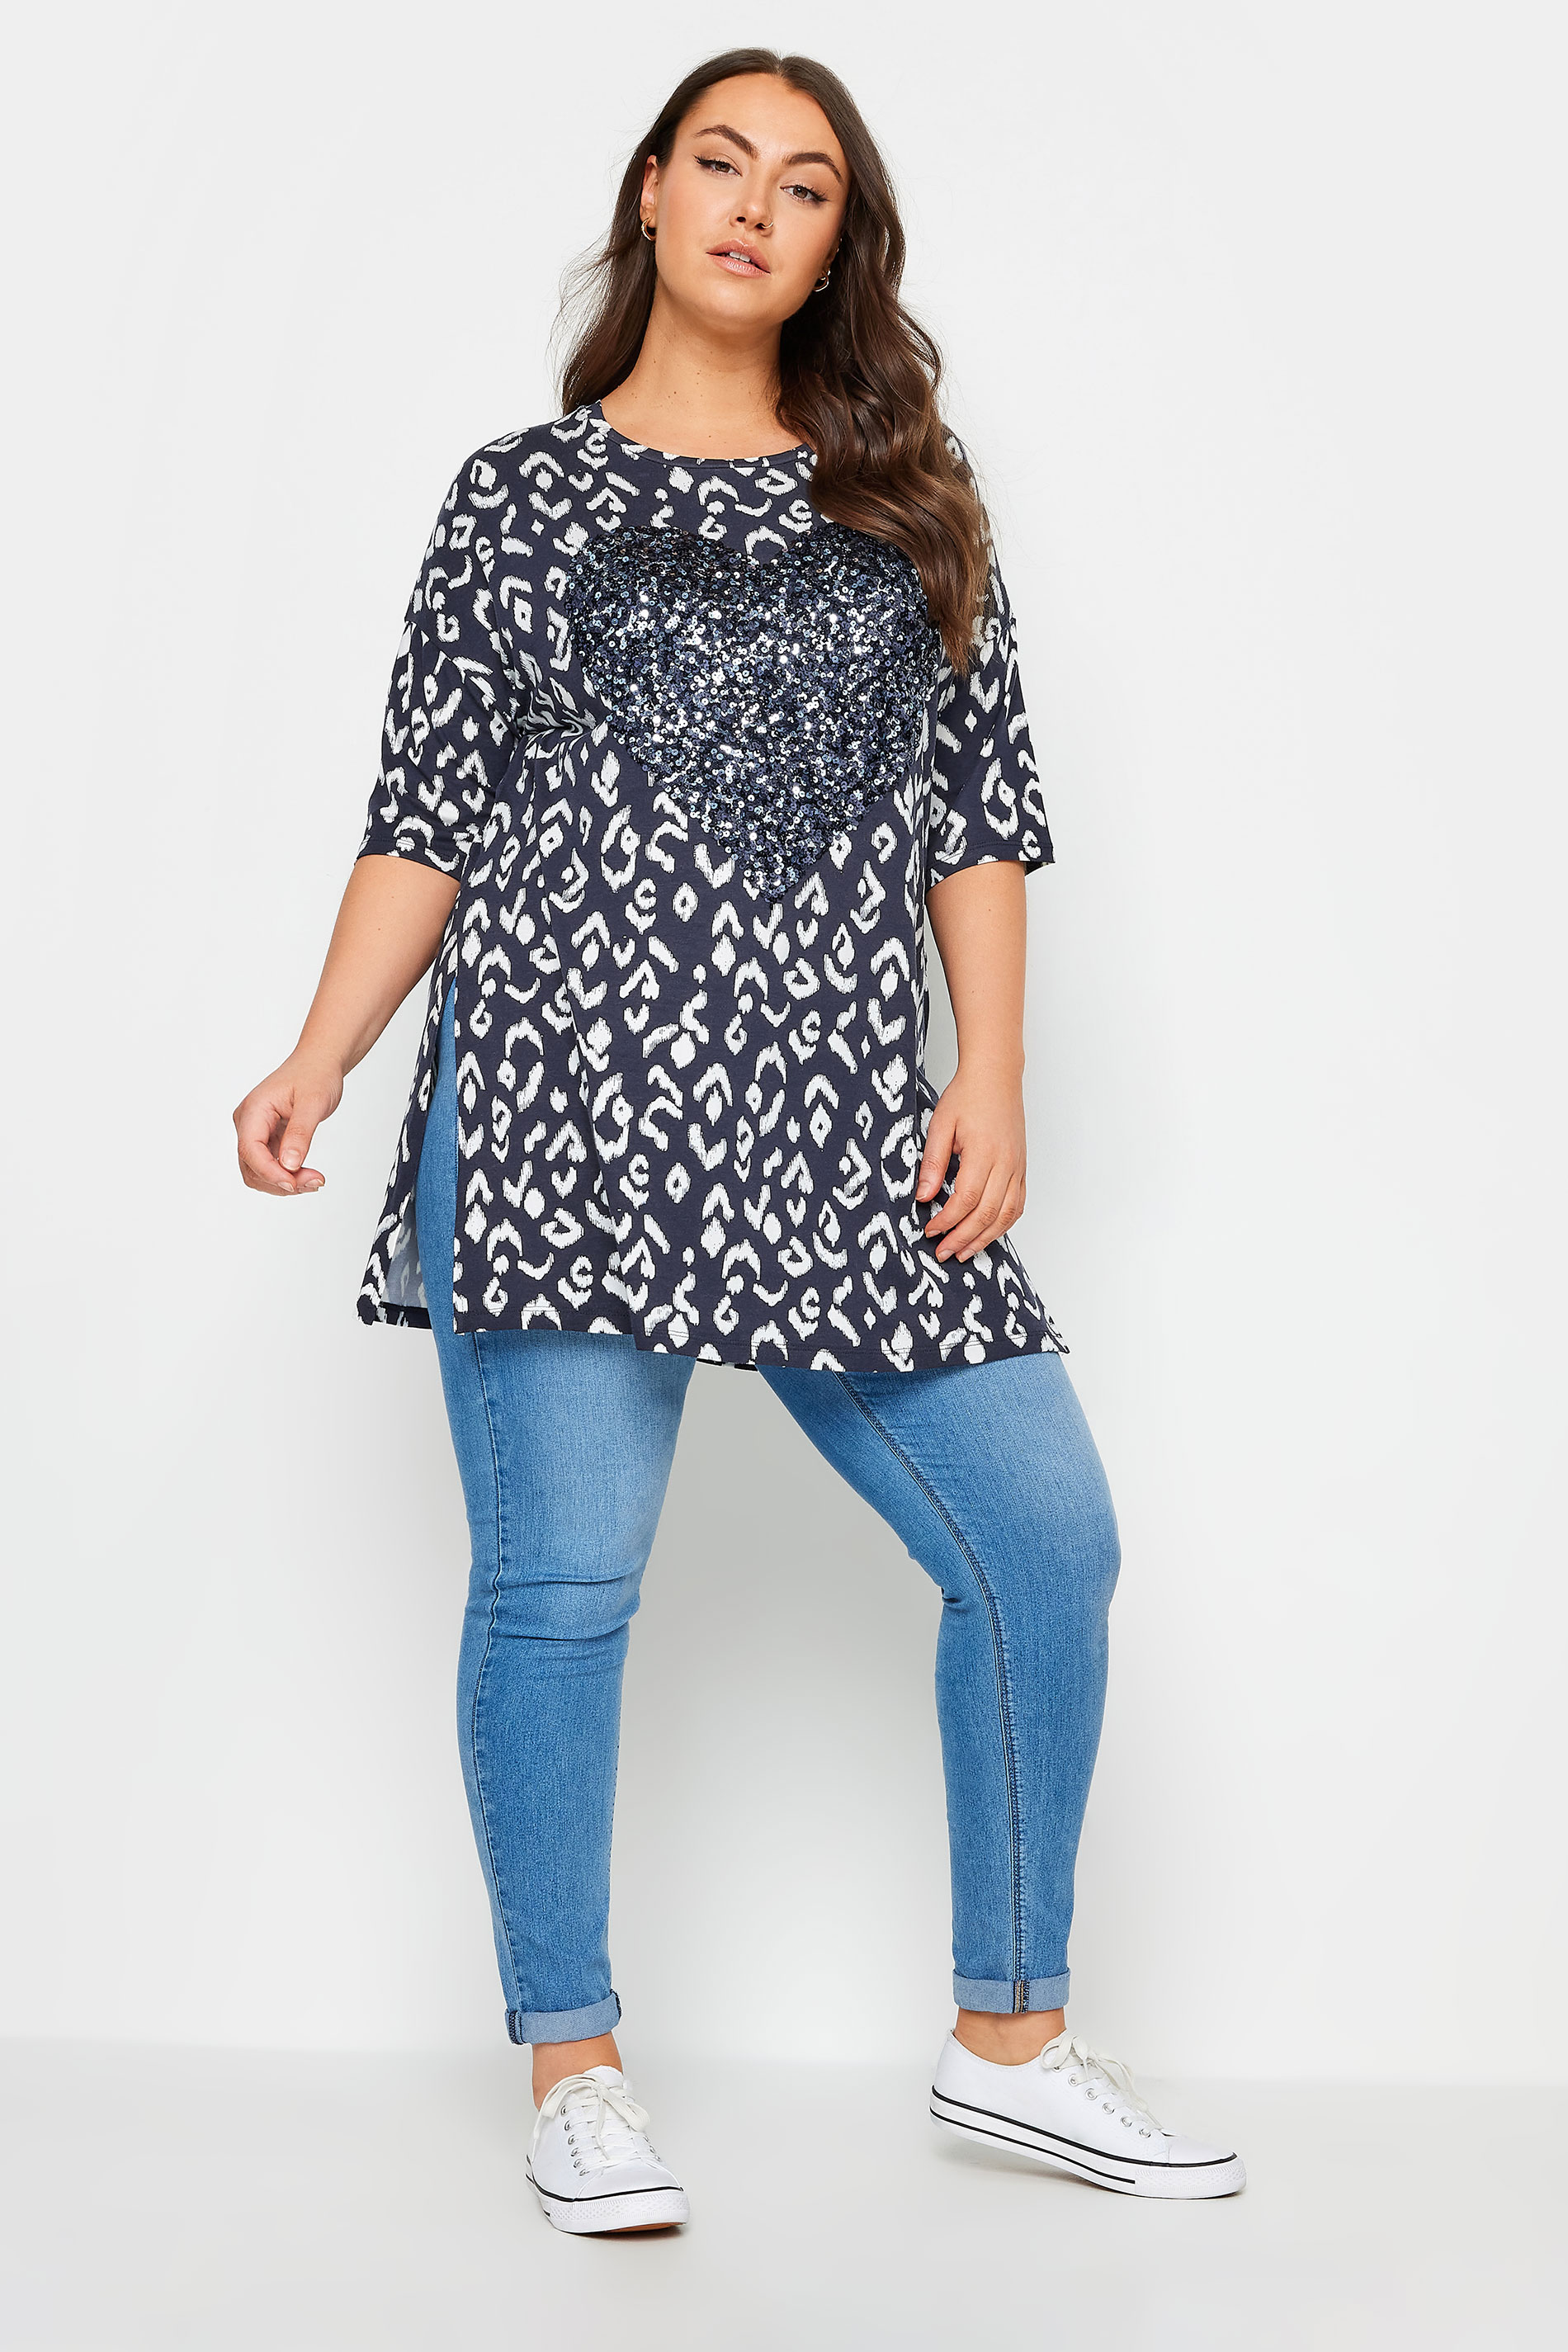 YOURS Plus Size Blue Heart Sequin Embellished Top | Yours Clothing 2